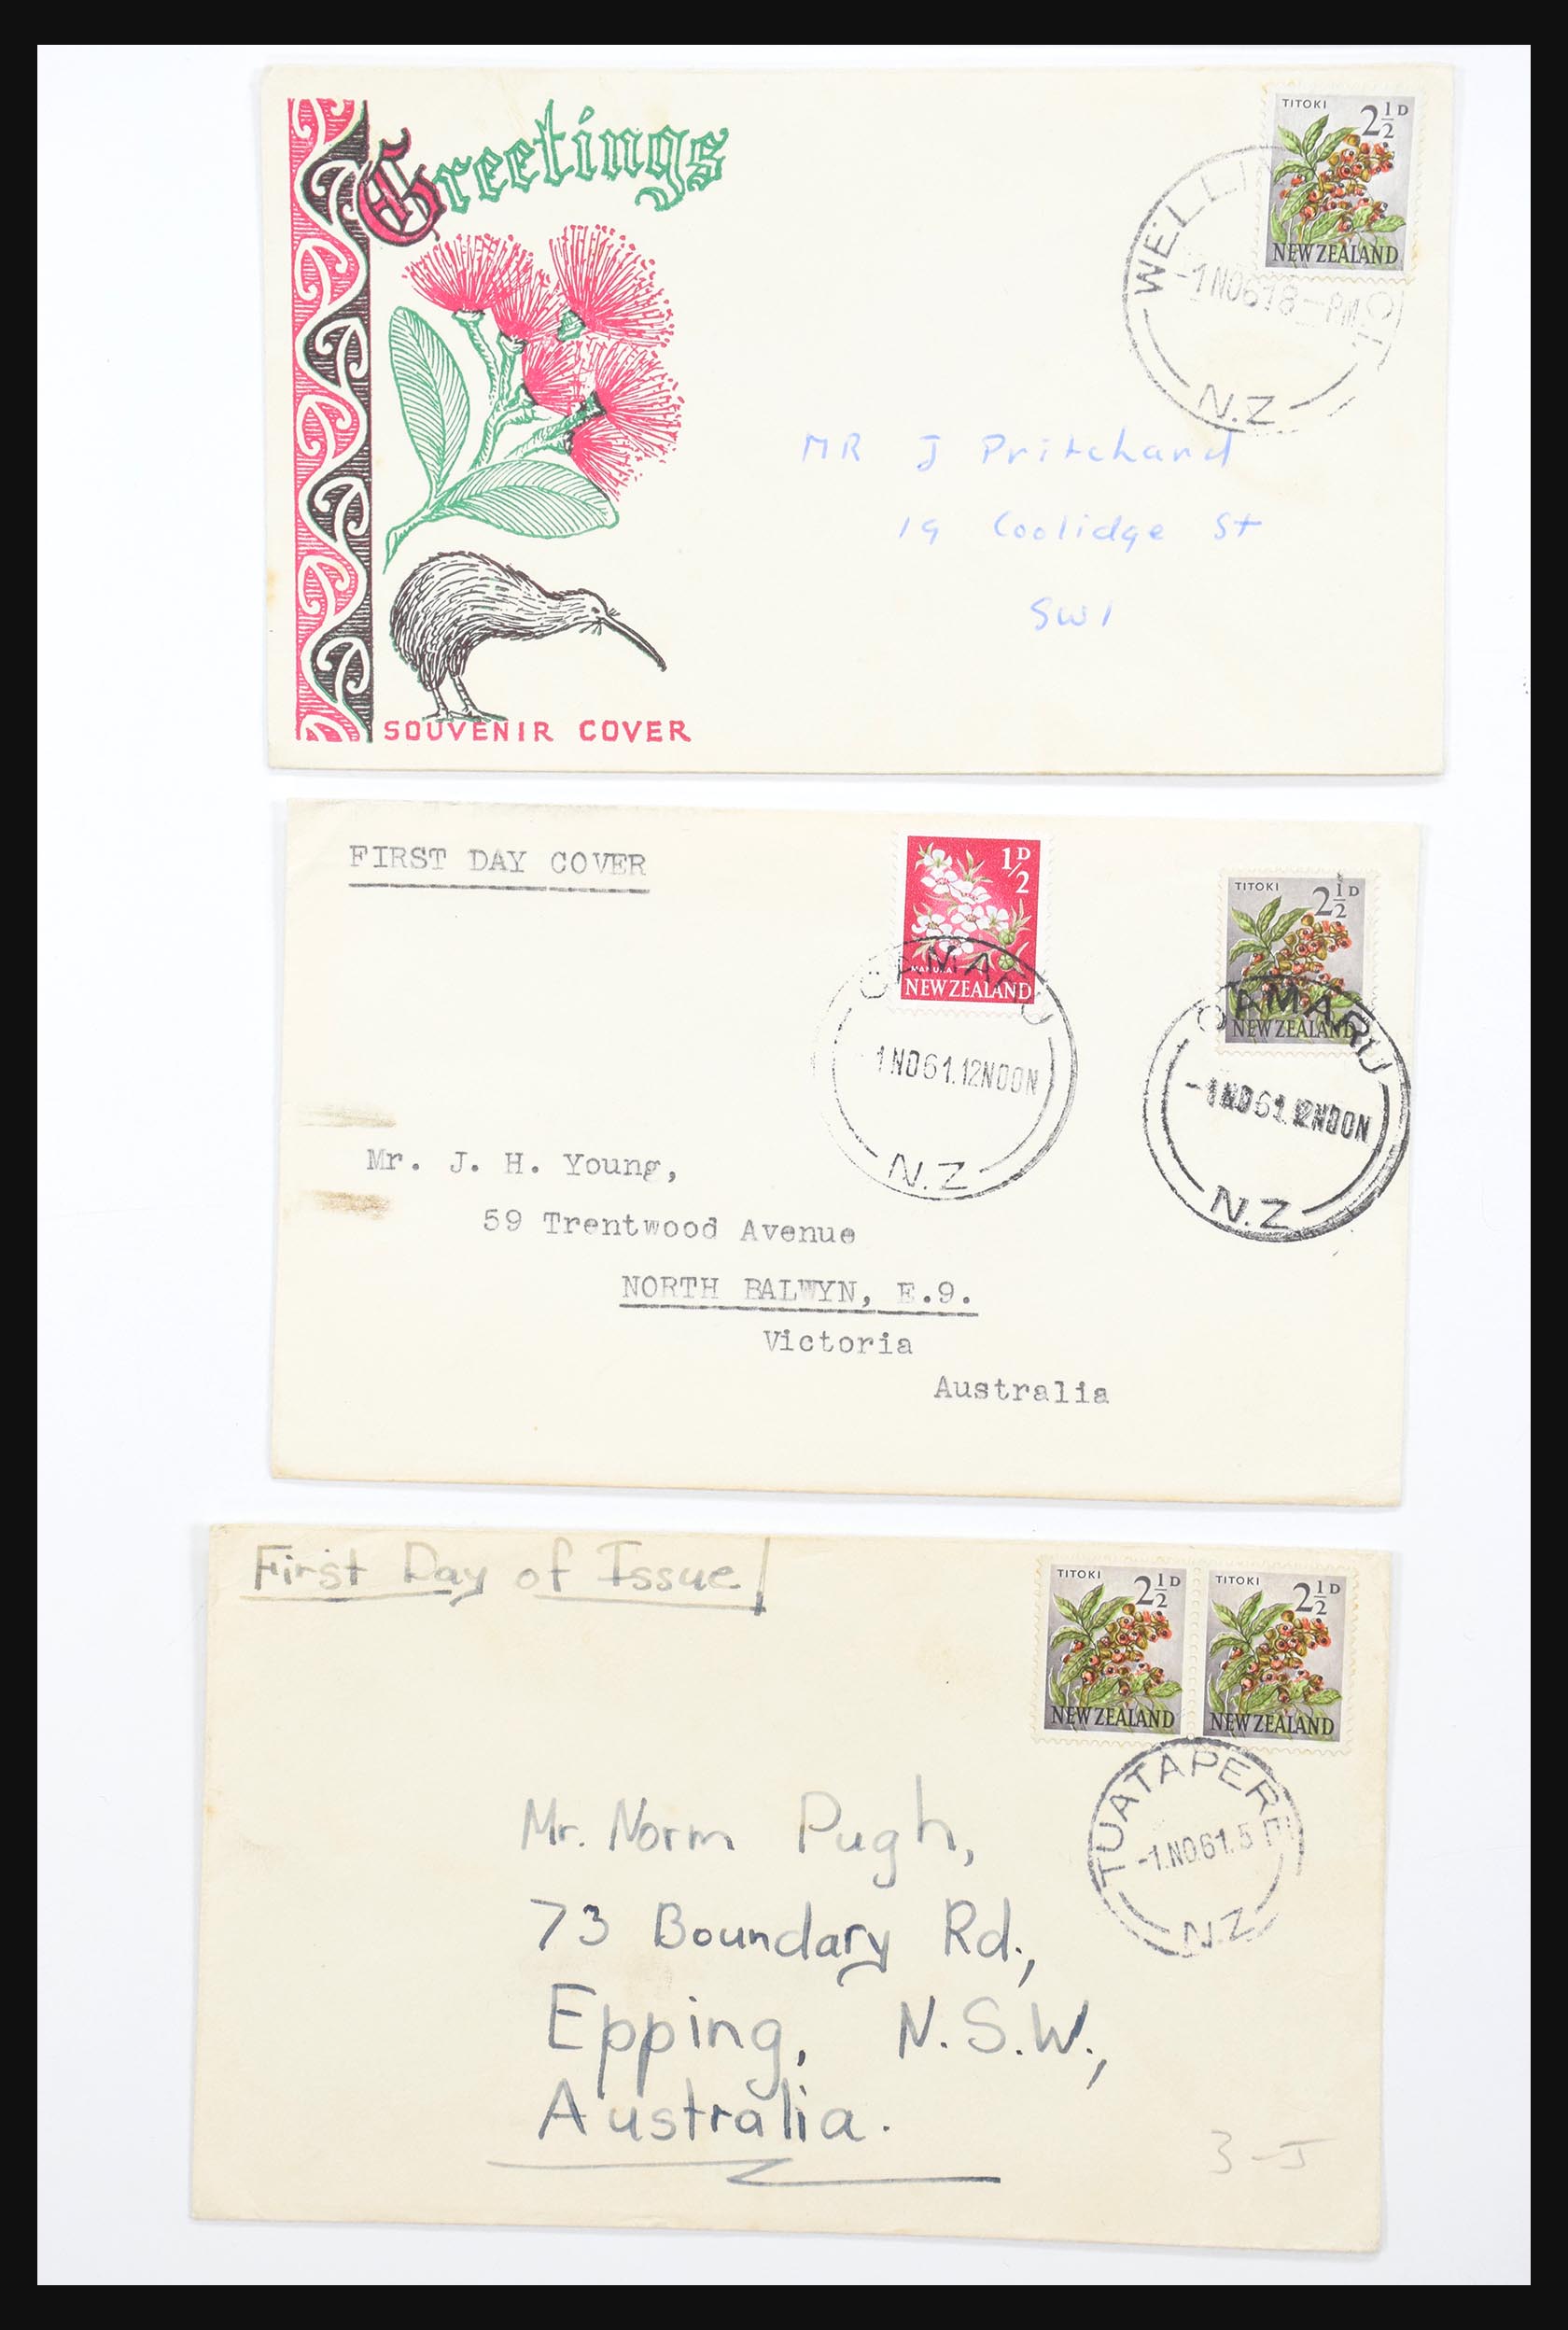 30821 022 - 30821 New Zealand FDC's 1960-1971.